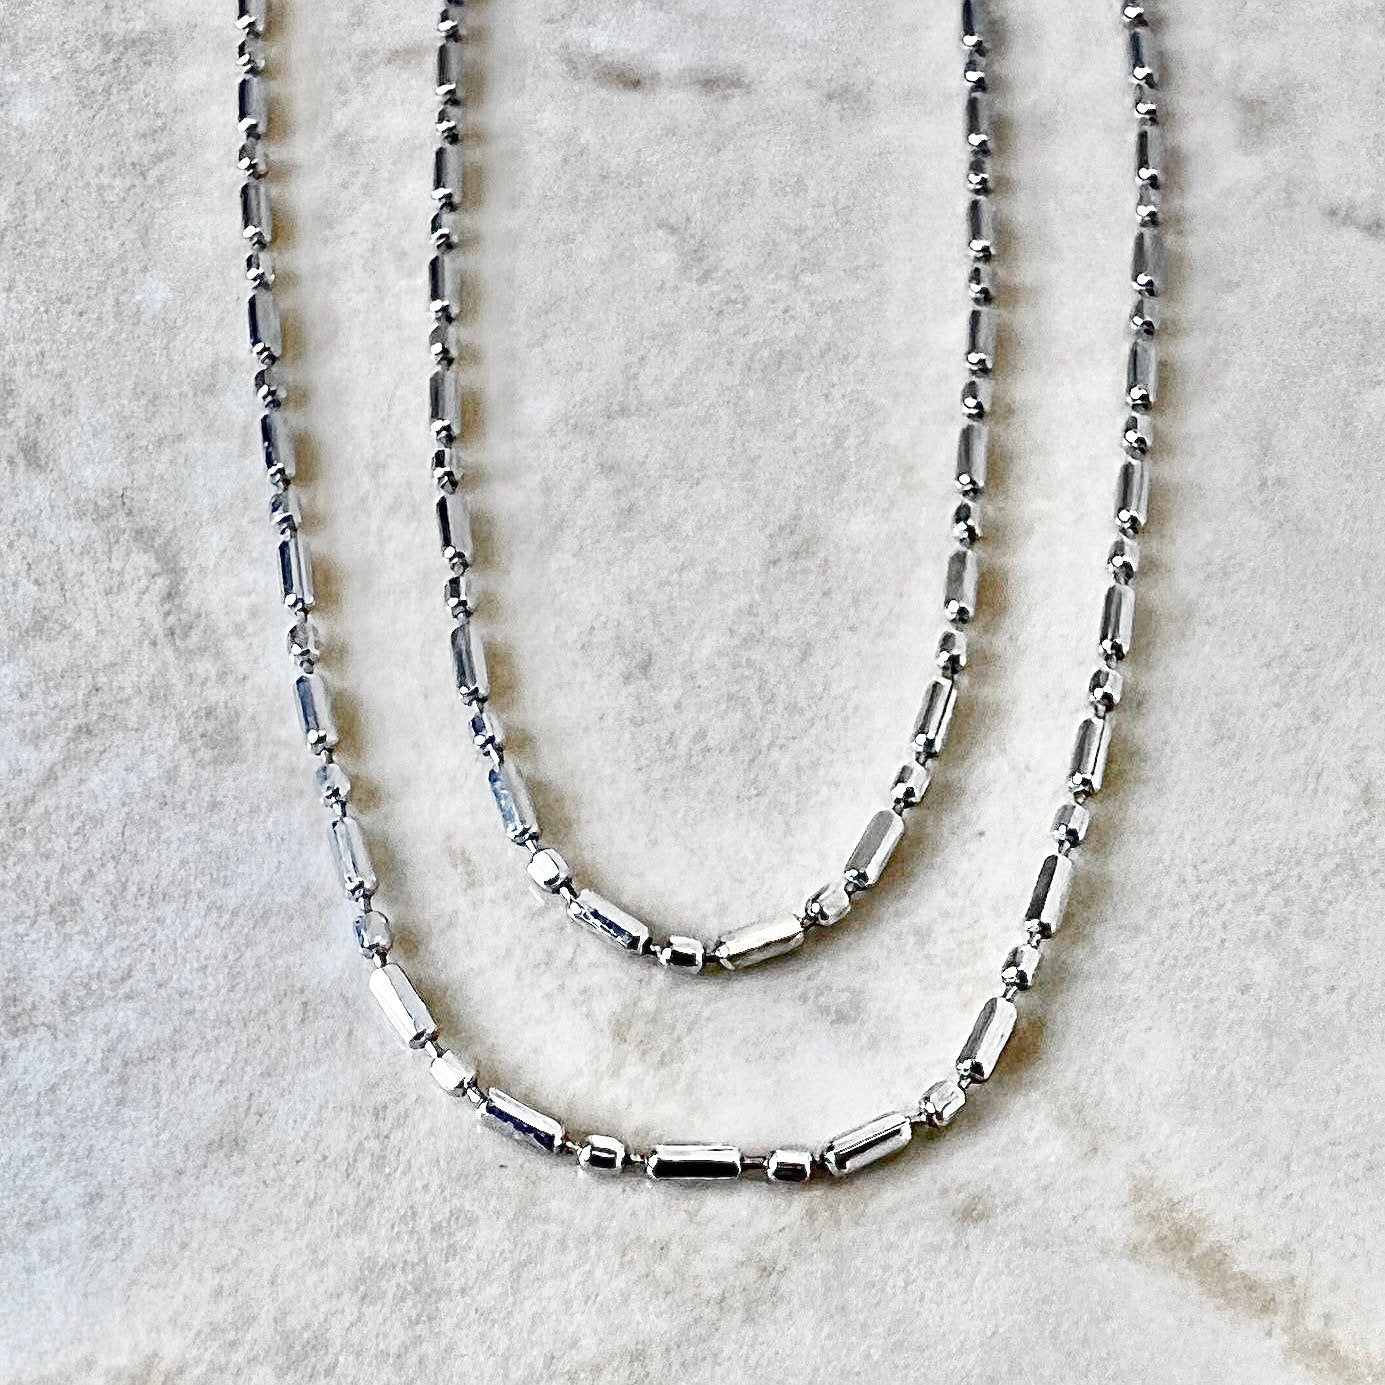 Vintage 14K White Gold Bar & Bead Chain - 18” Gold Chain - White Gold Pendant Necklace - Birthday Gift For Her - Holiday Gift